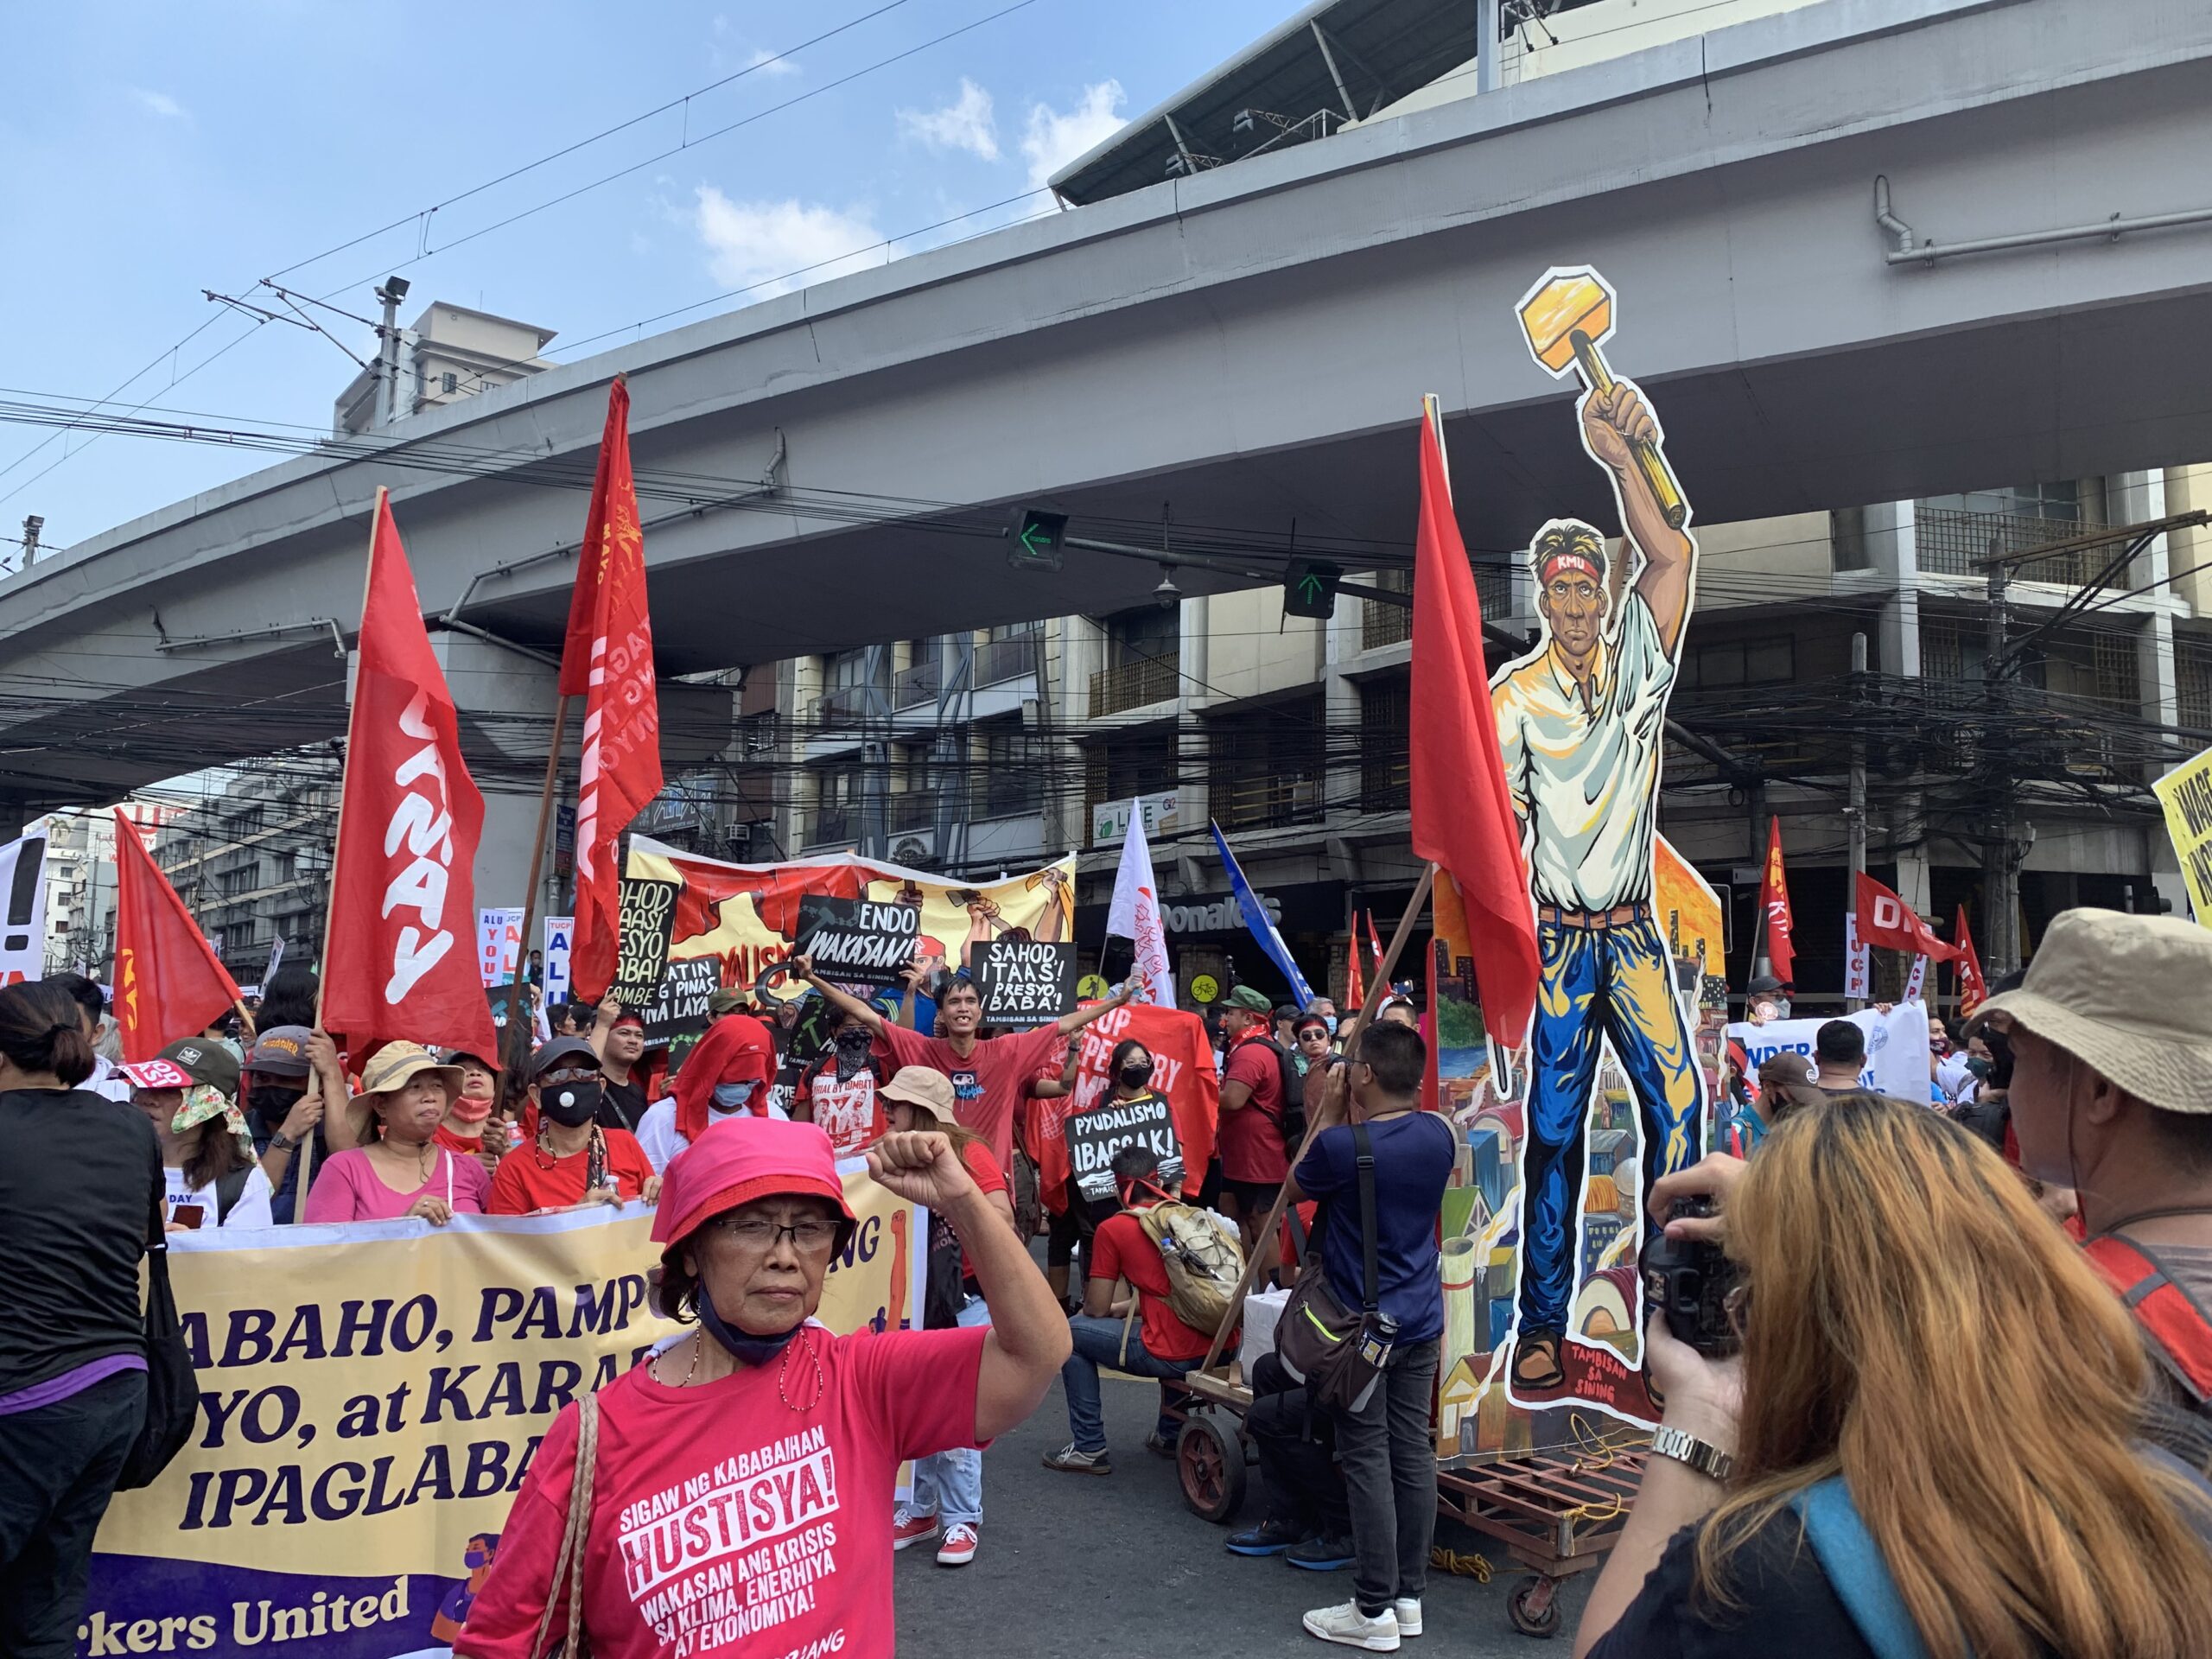 LOOK: Workers' groups converge in Mendiola, conduct Labor Day protest